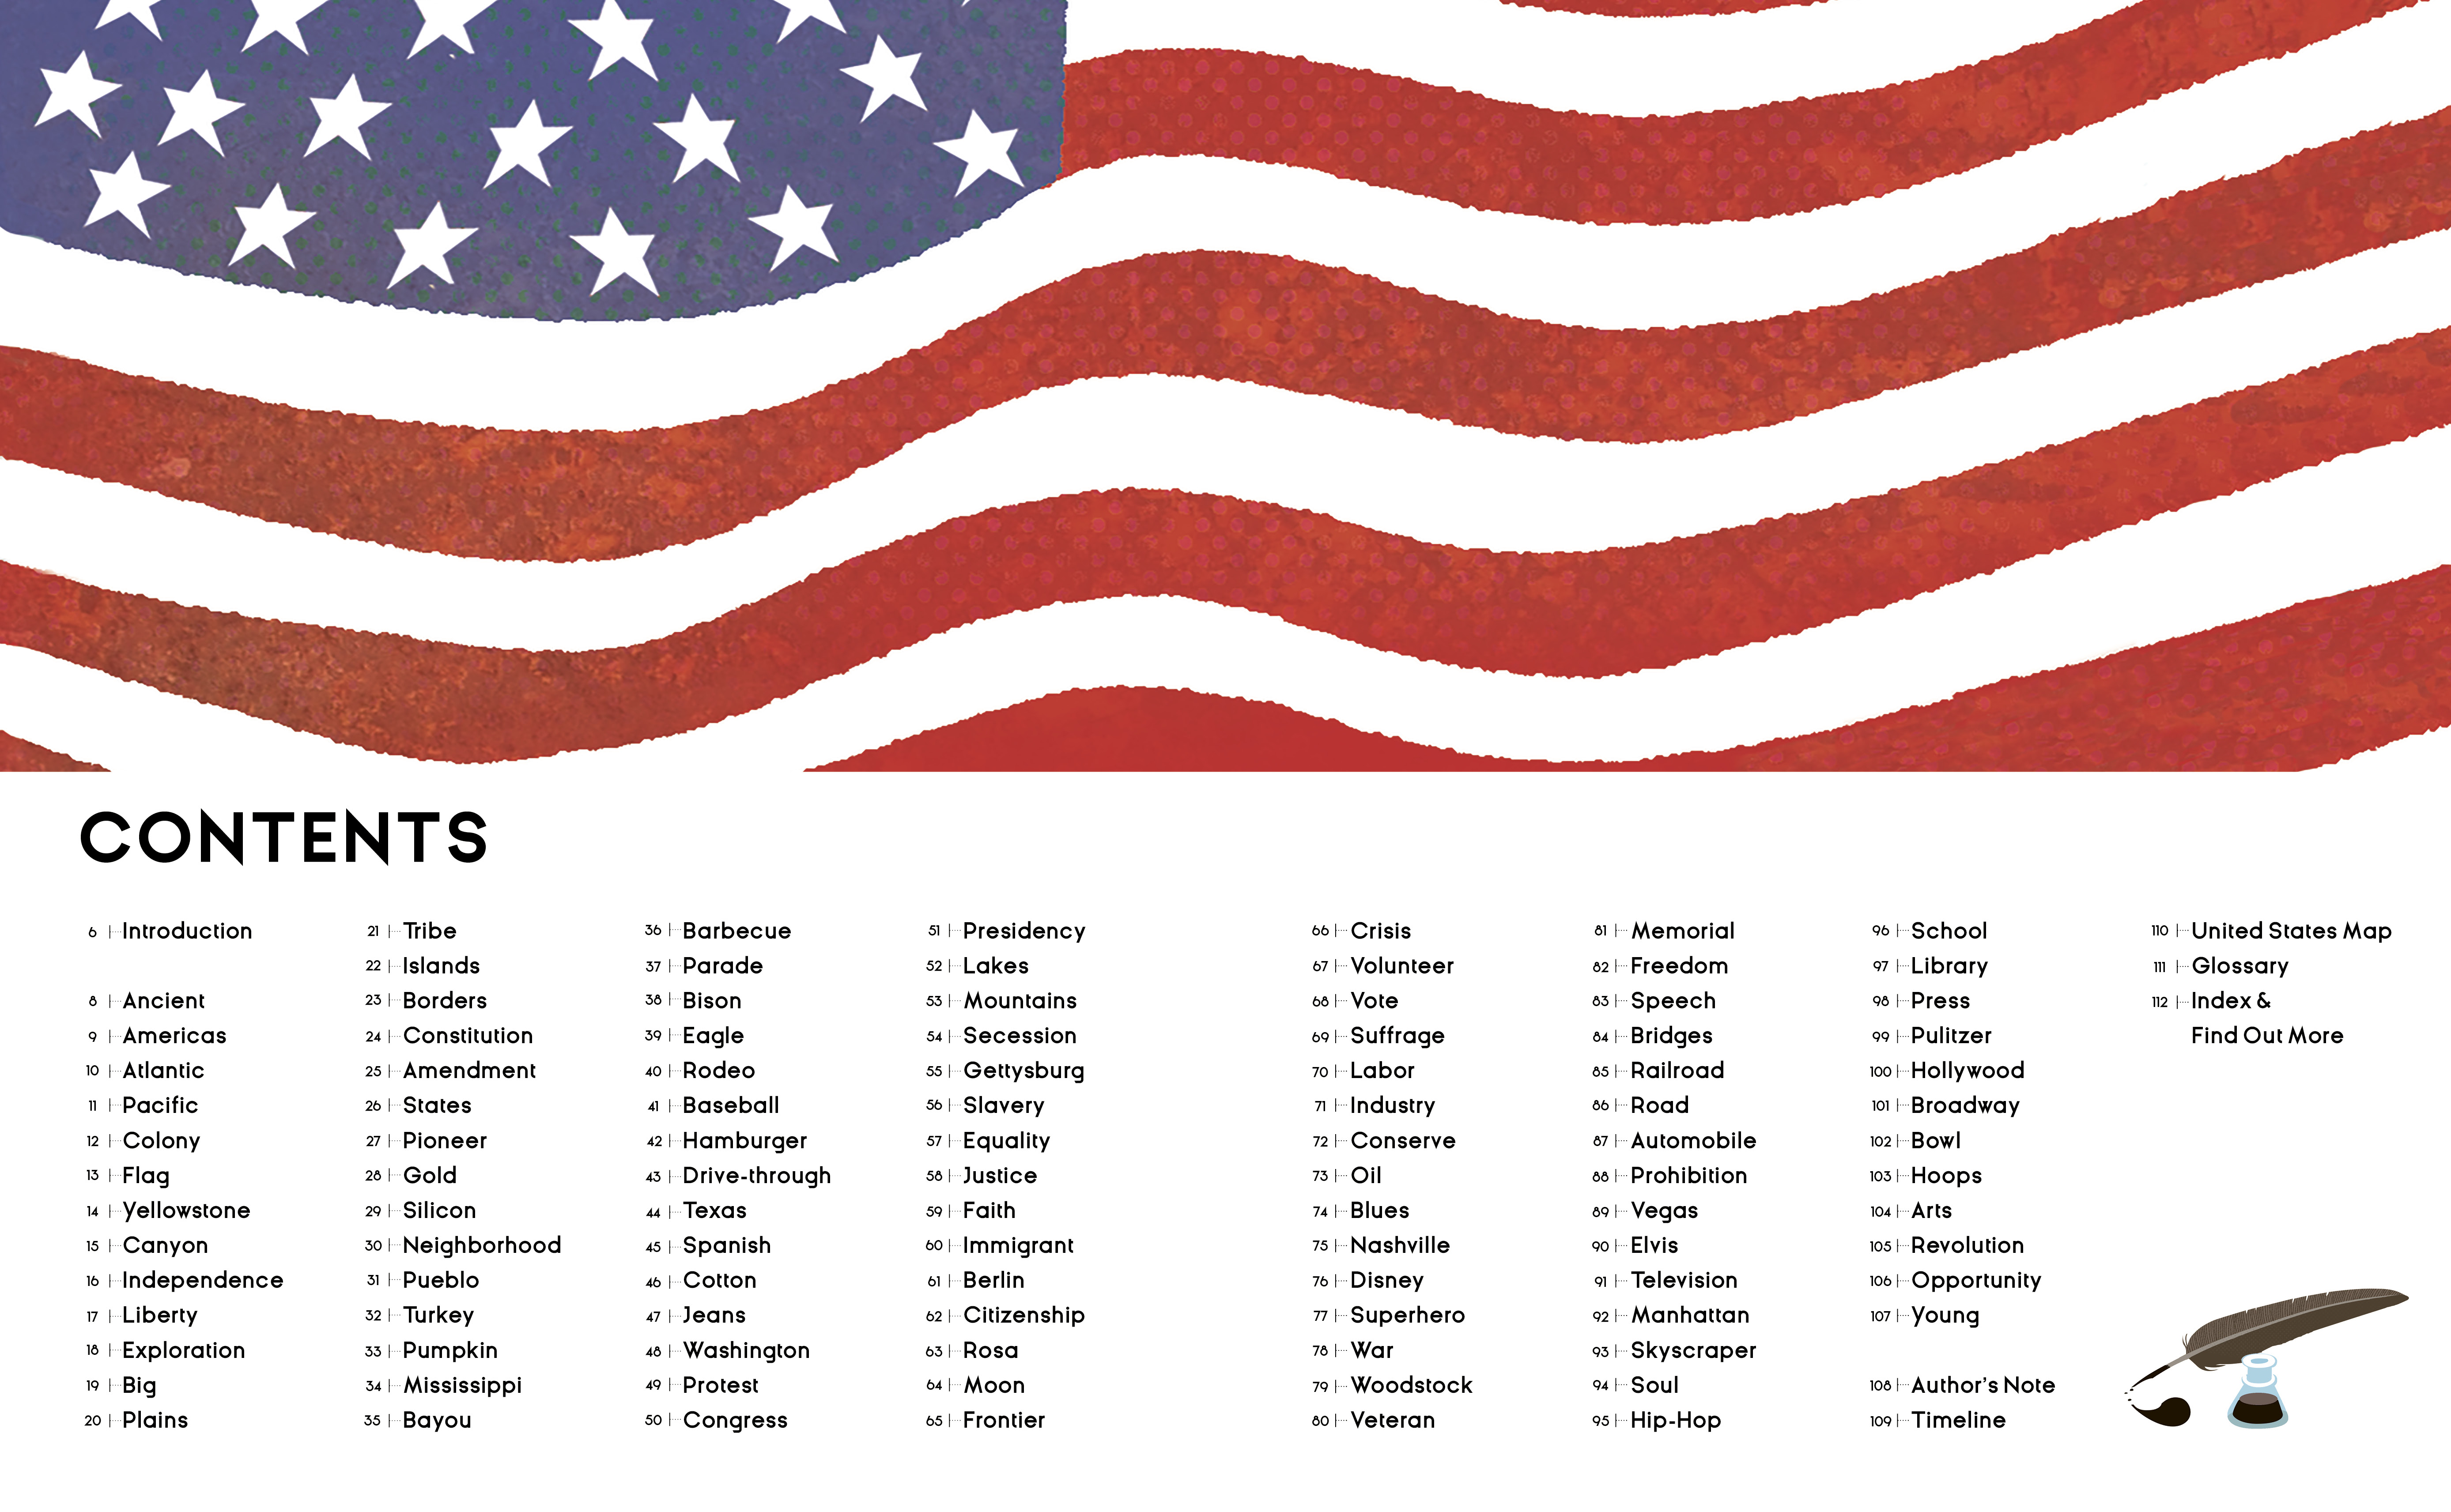 The United States in 100 Words